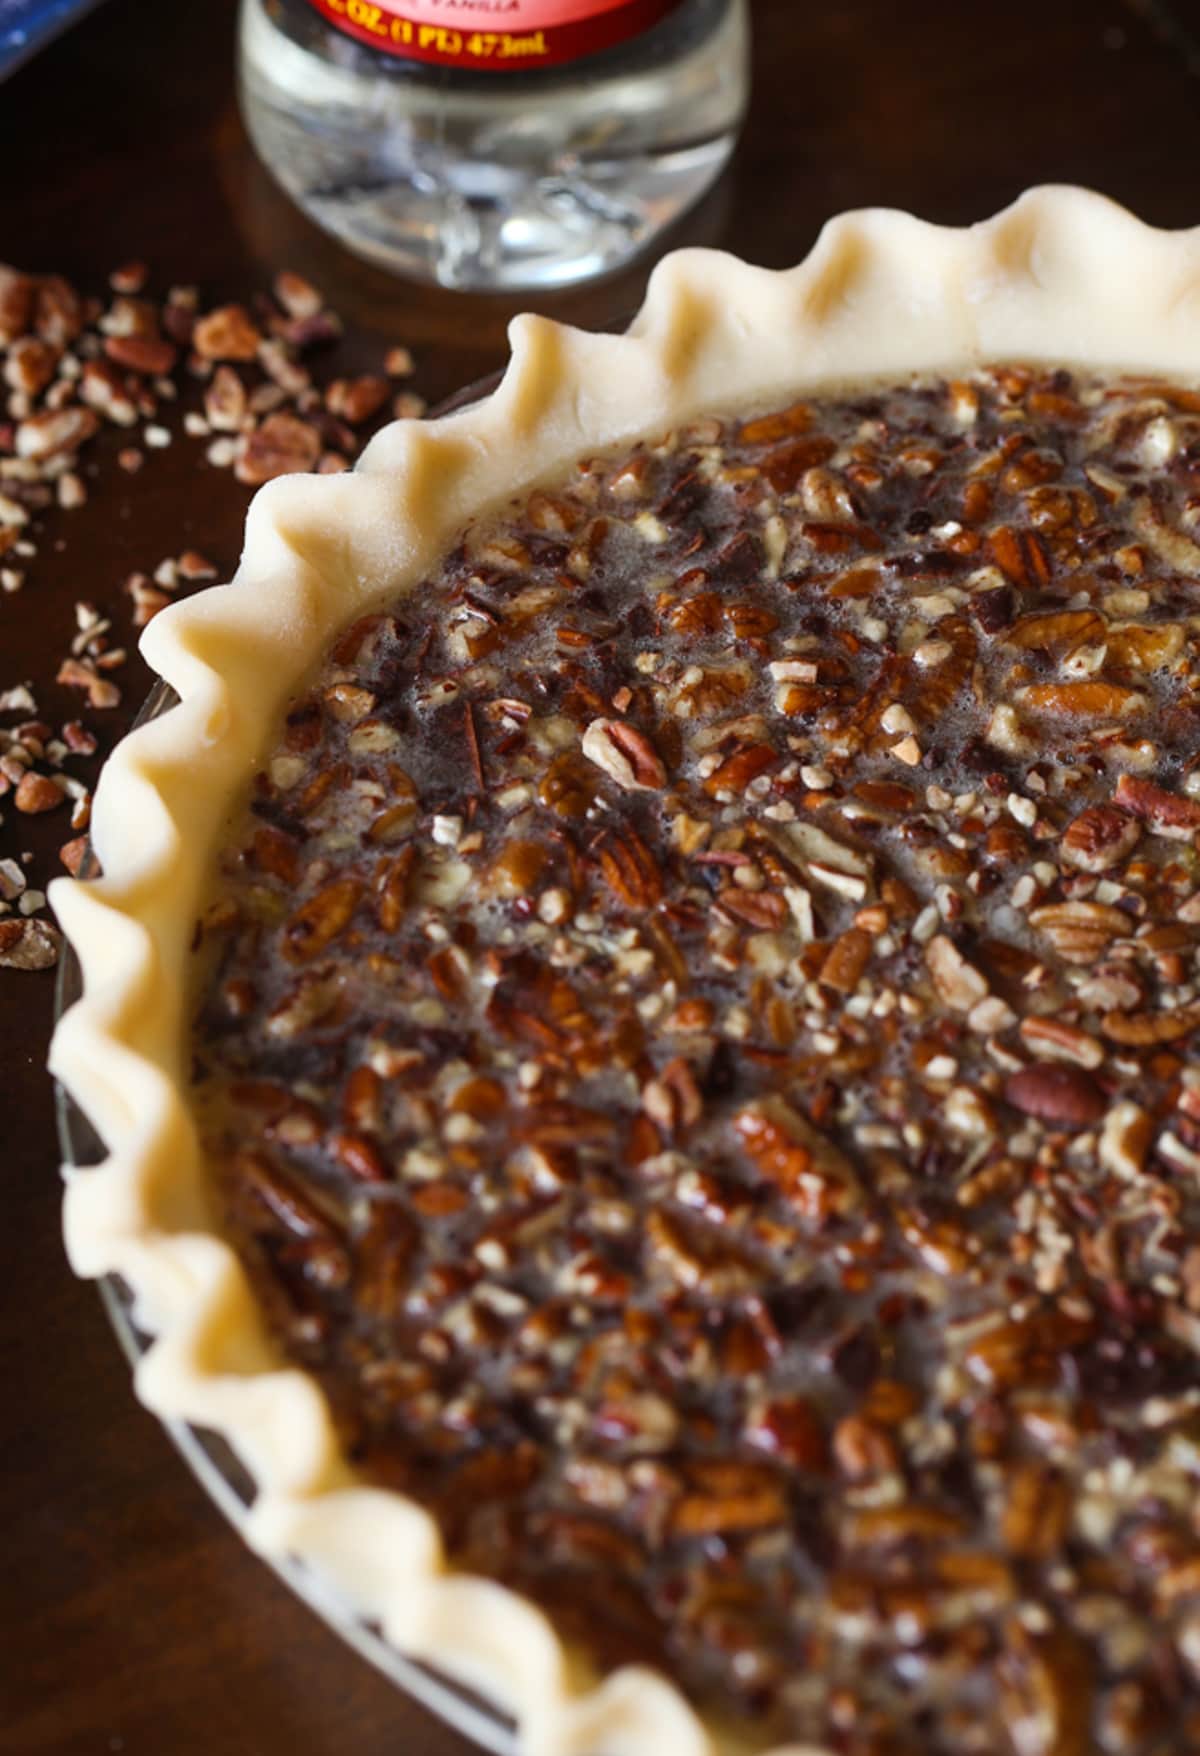 An unbaked chocolate pecan pie in a pie shell before putting it in the oven.